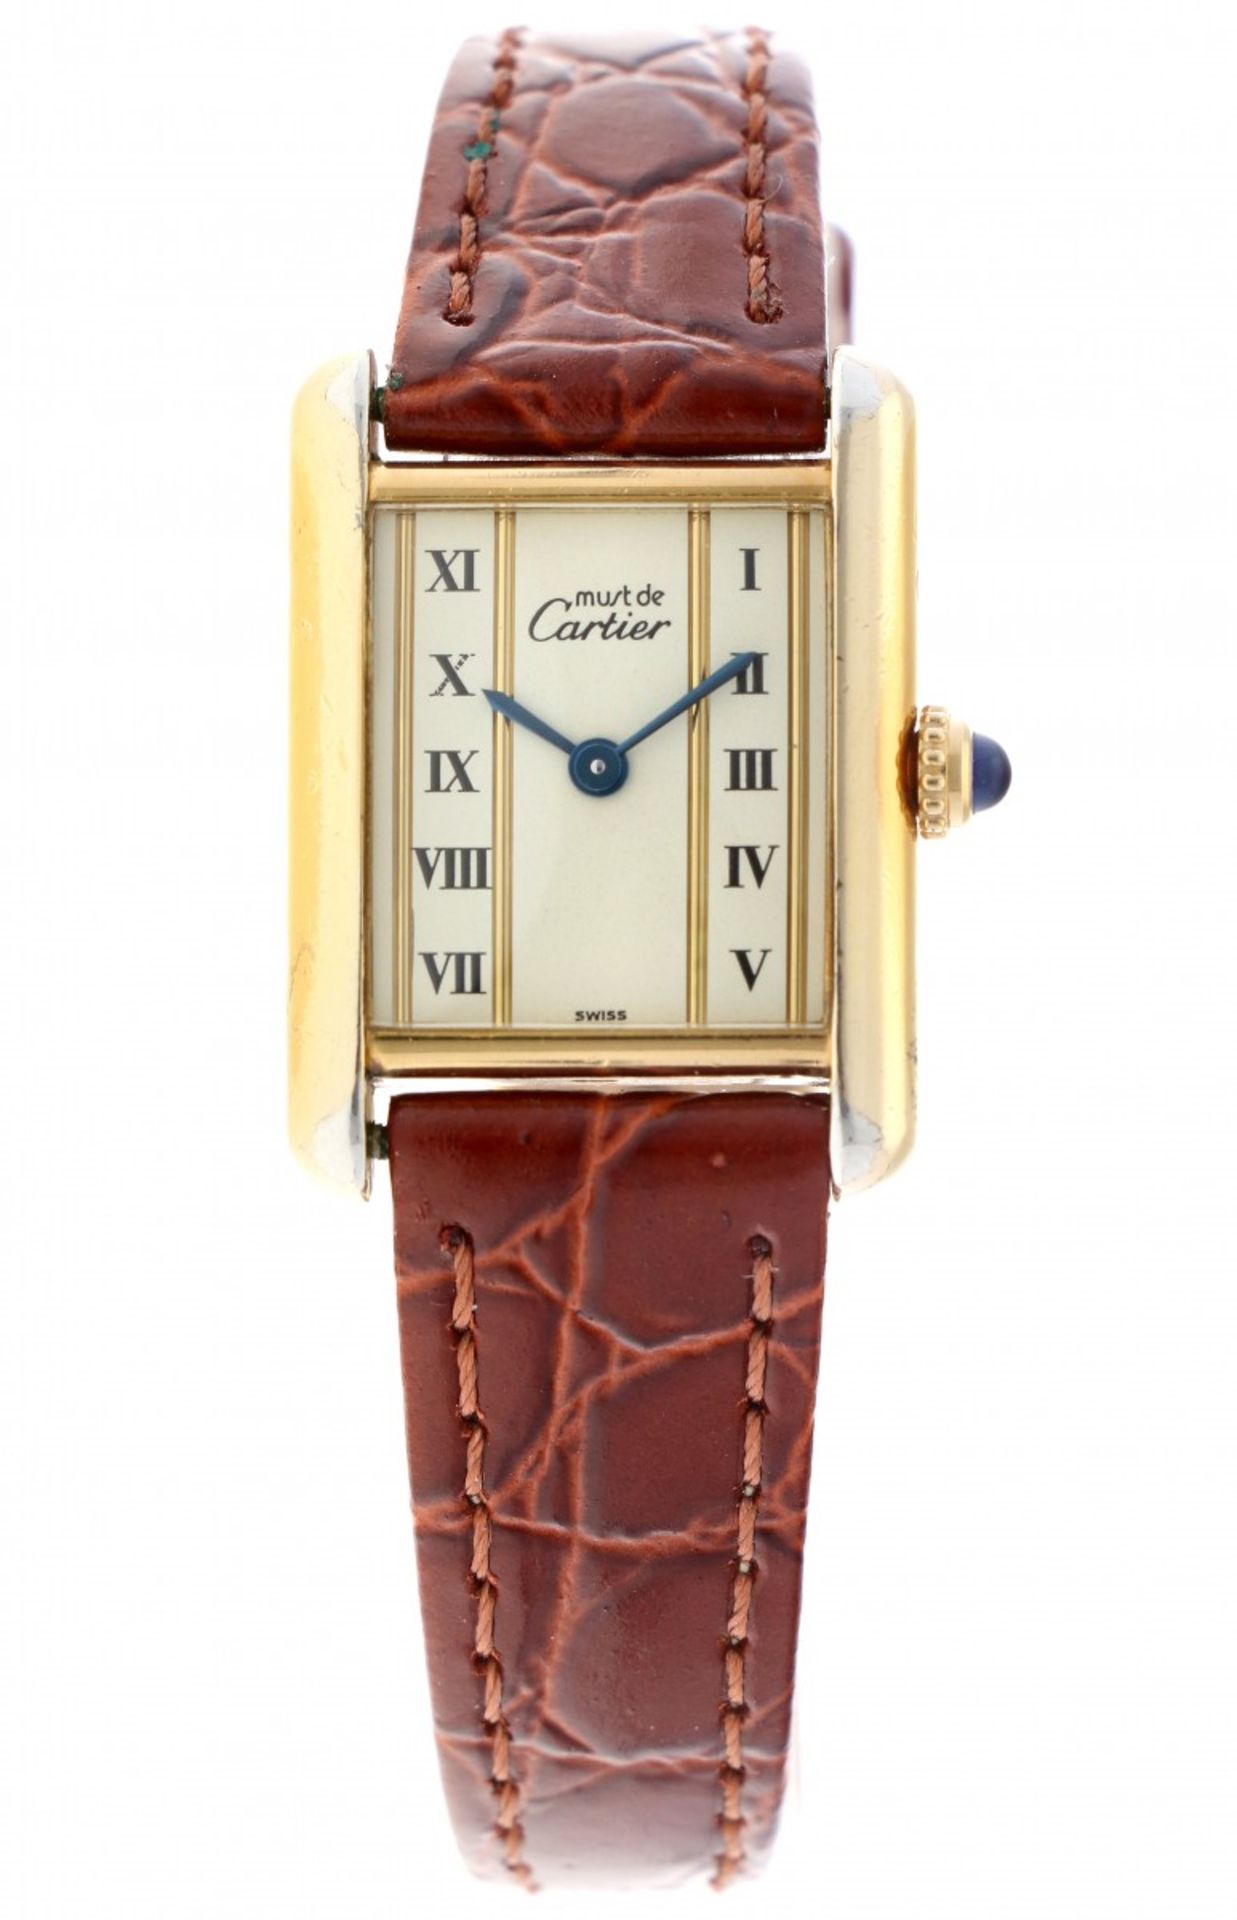 Cartier Must 5057001 - Ladies Watch - approx. 1980